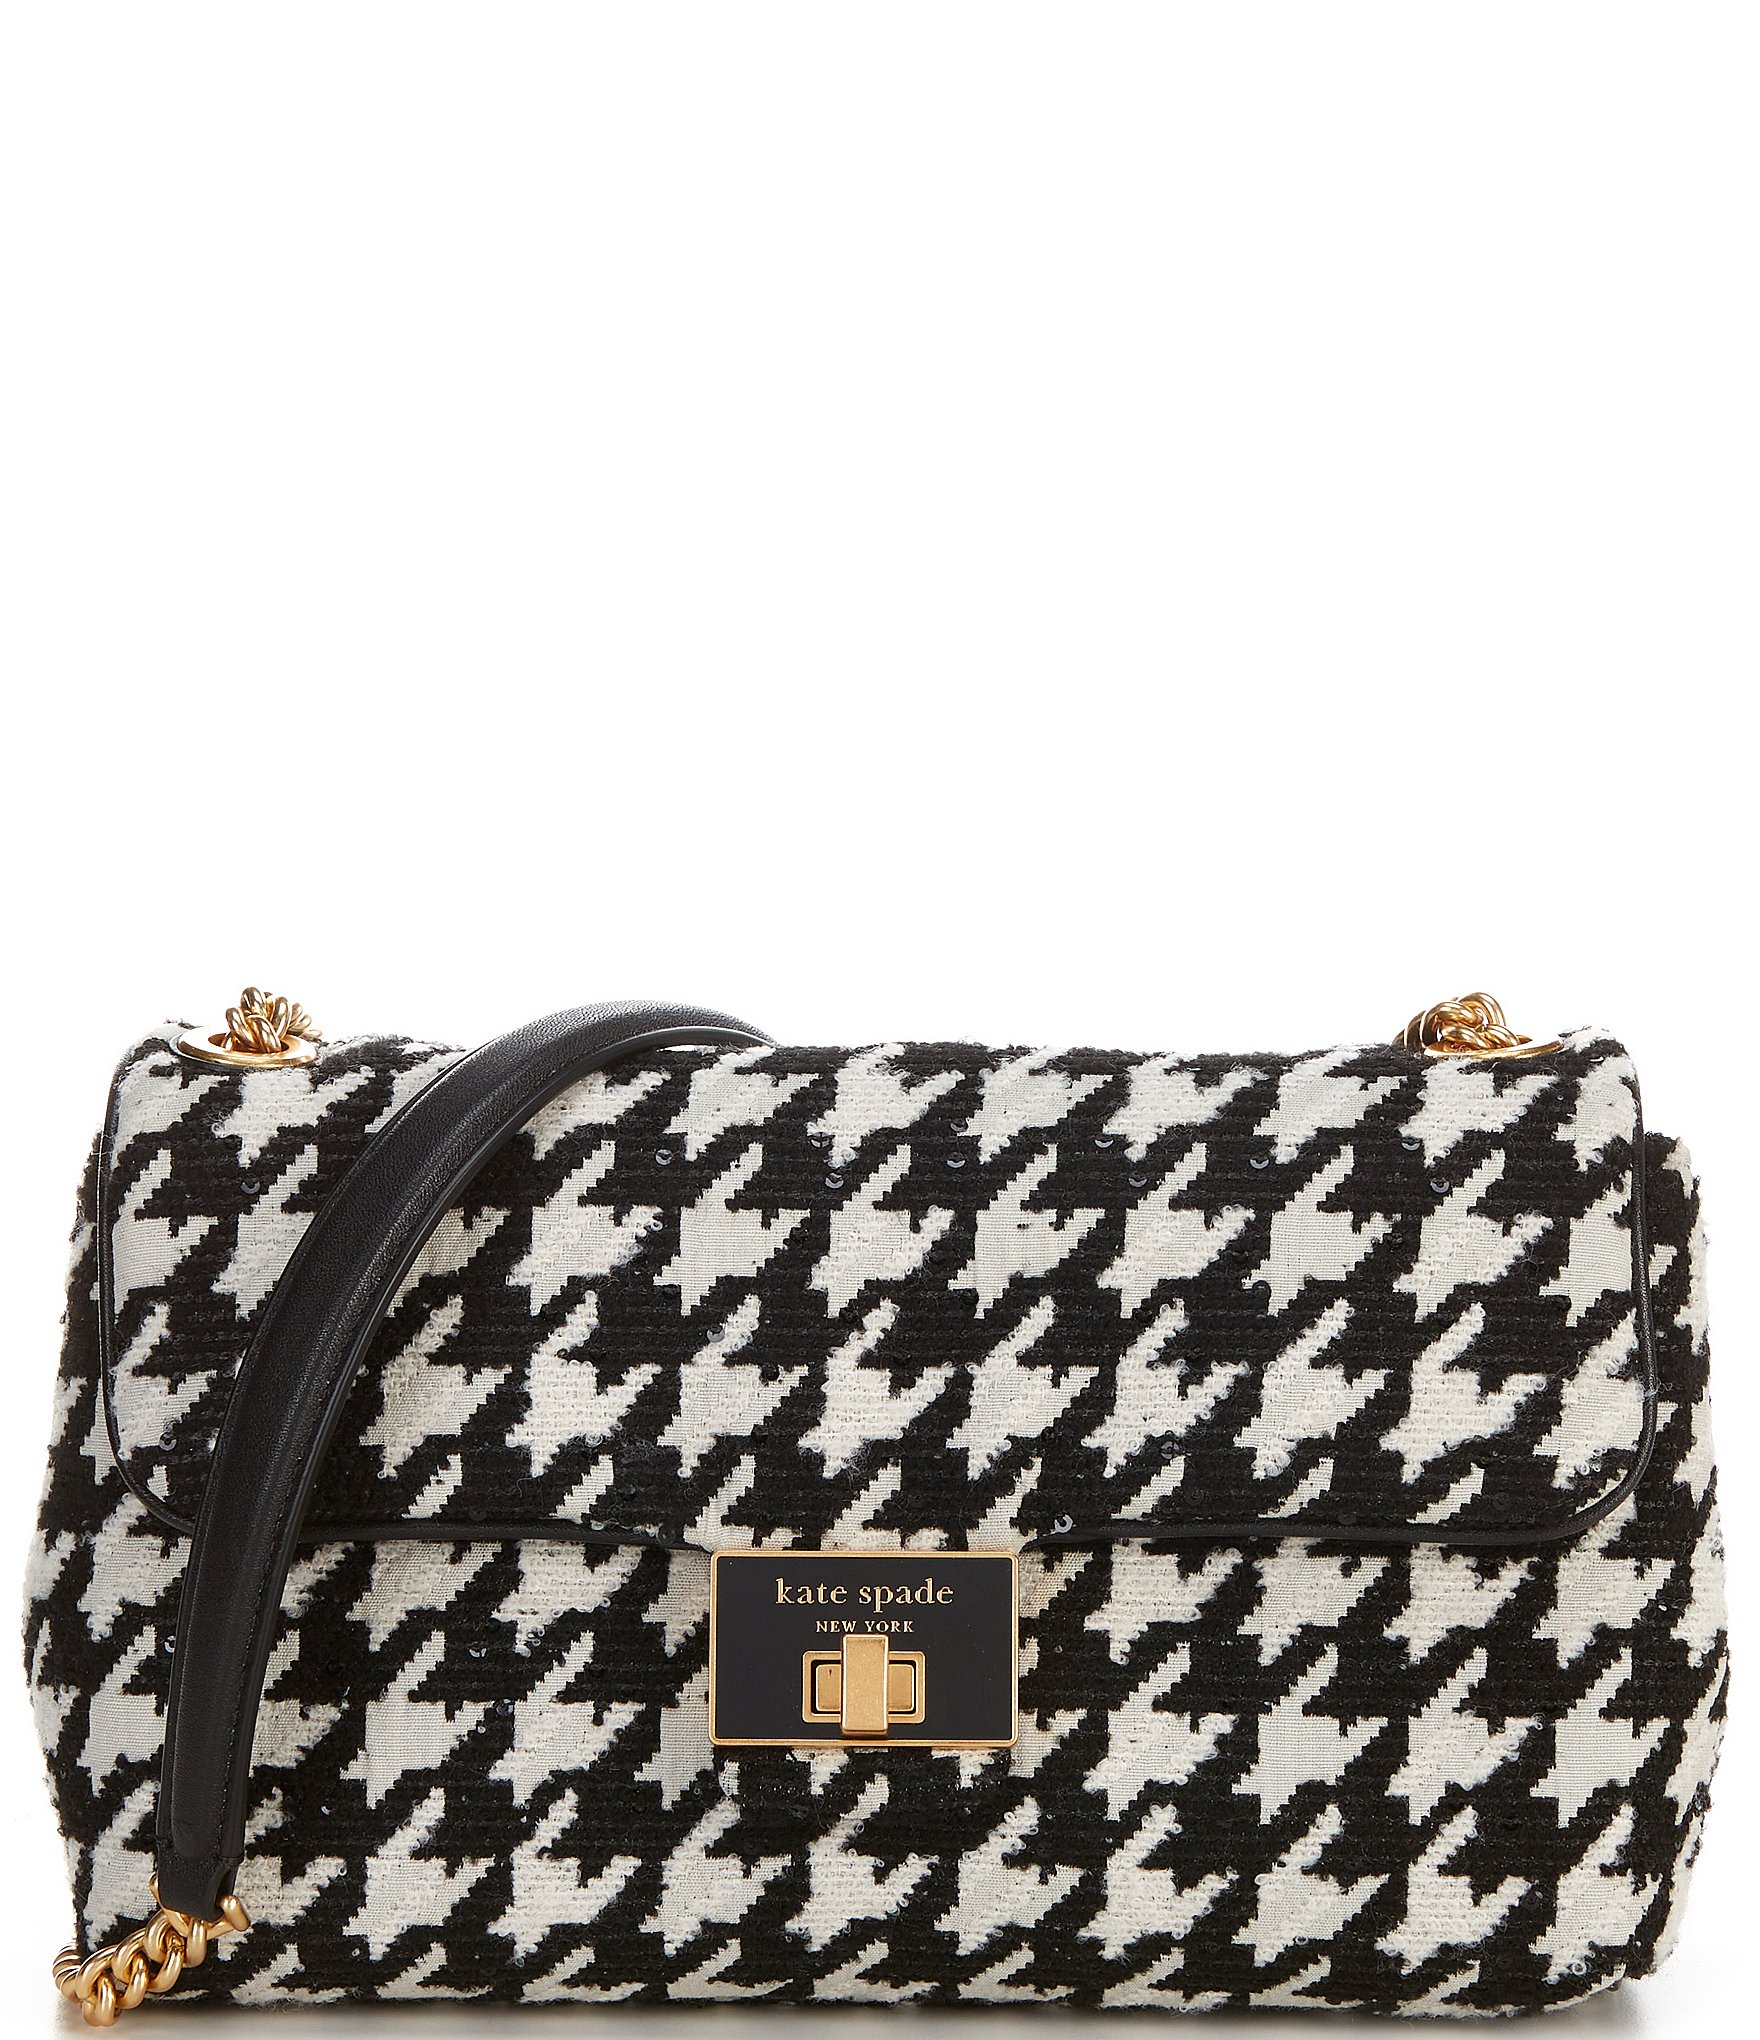 Morgan Painterly Houndstooth Small Bifold Wallet